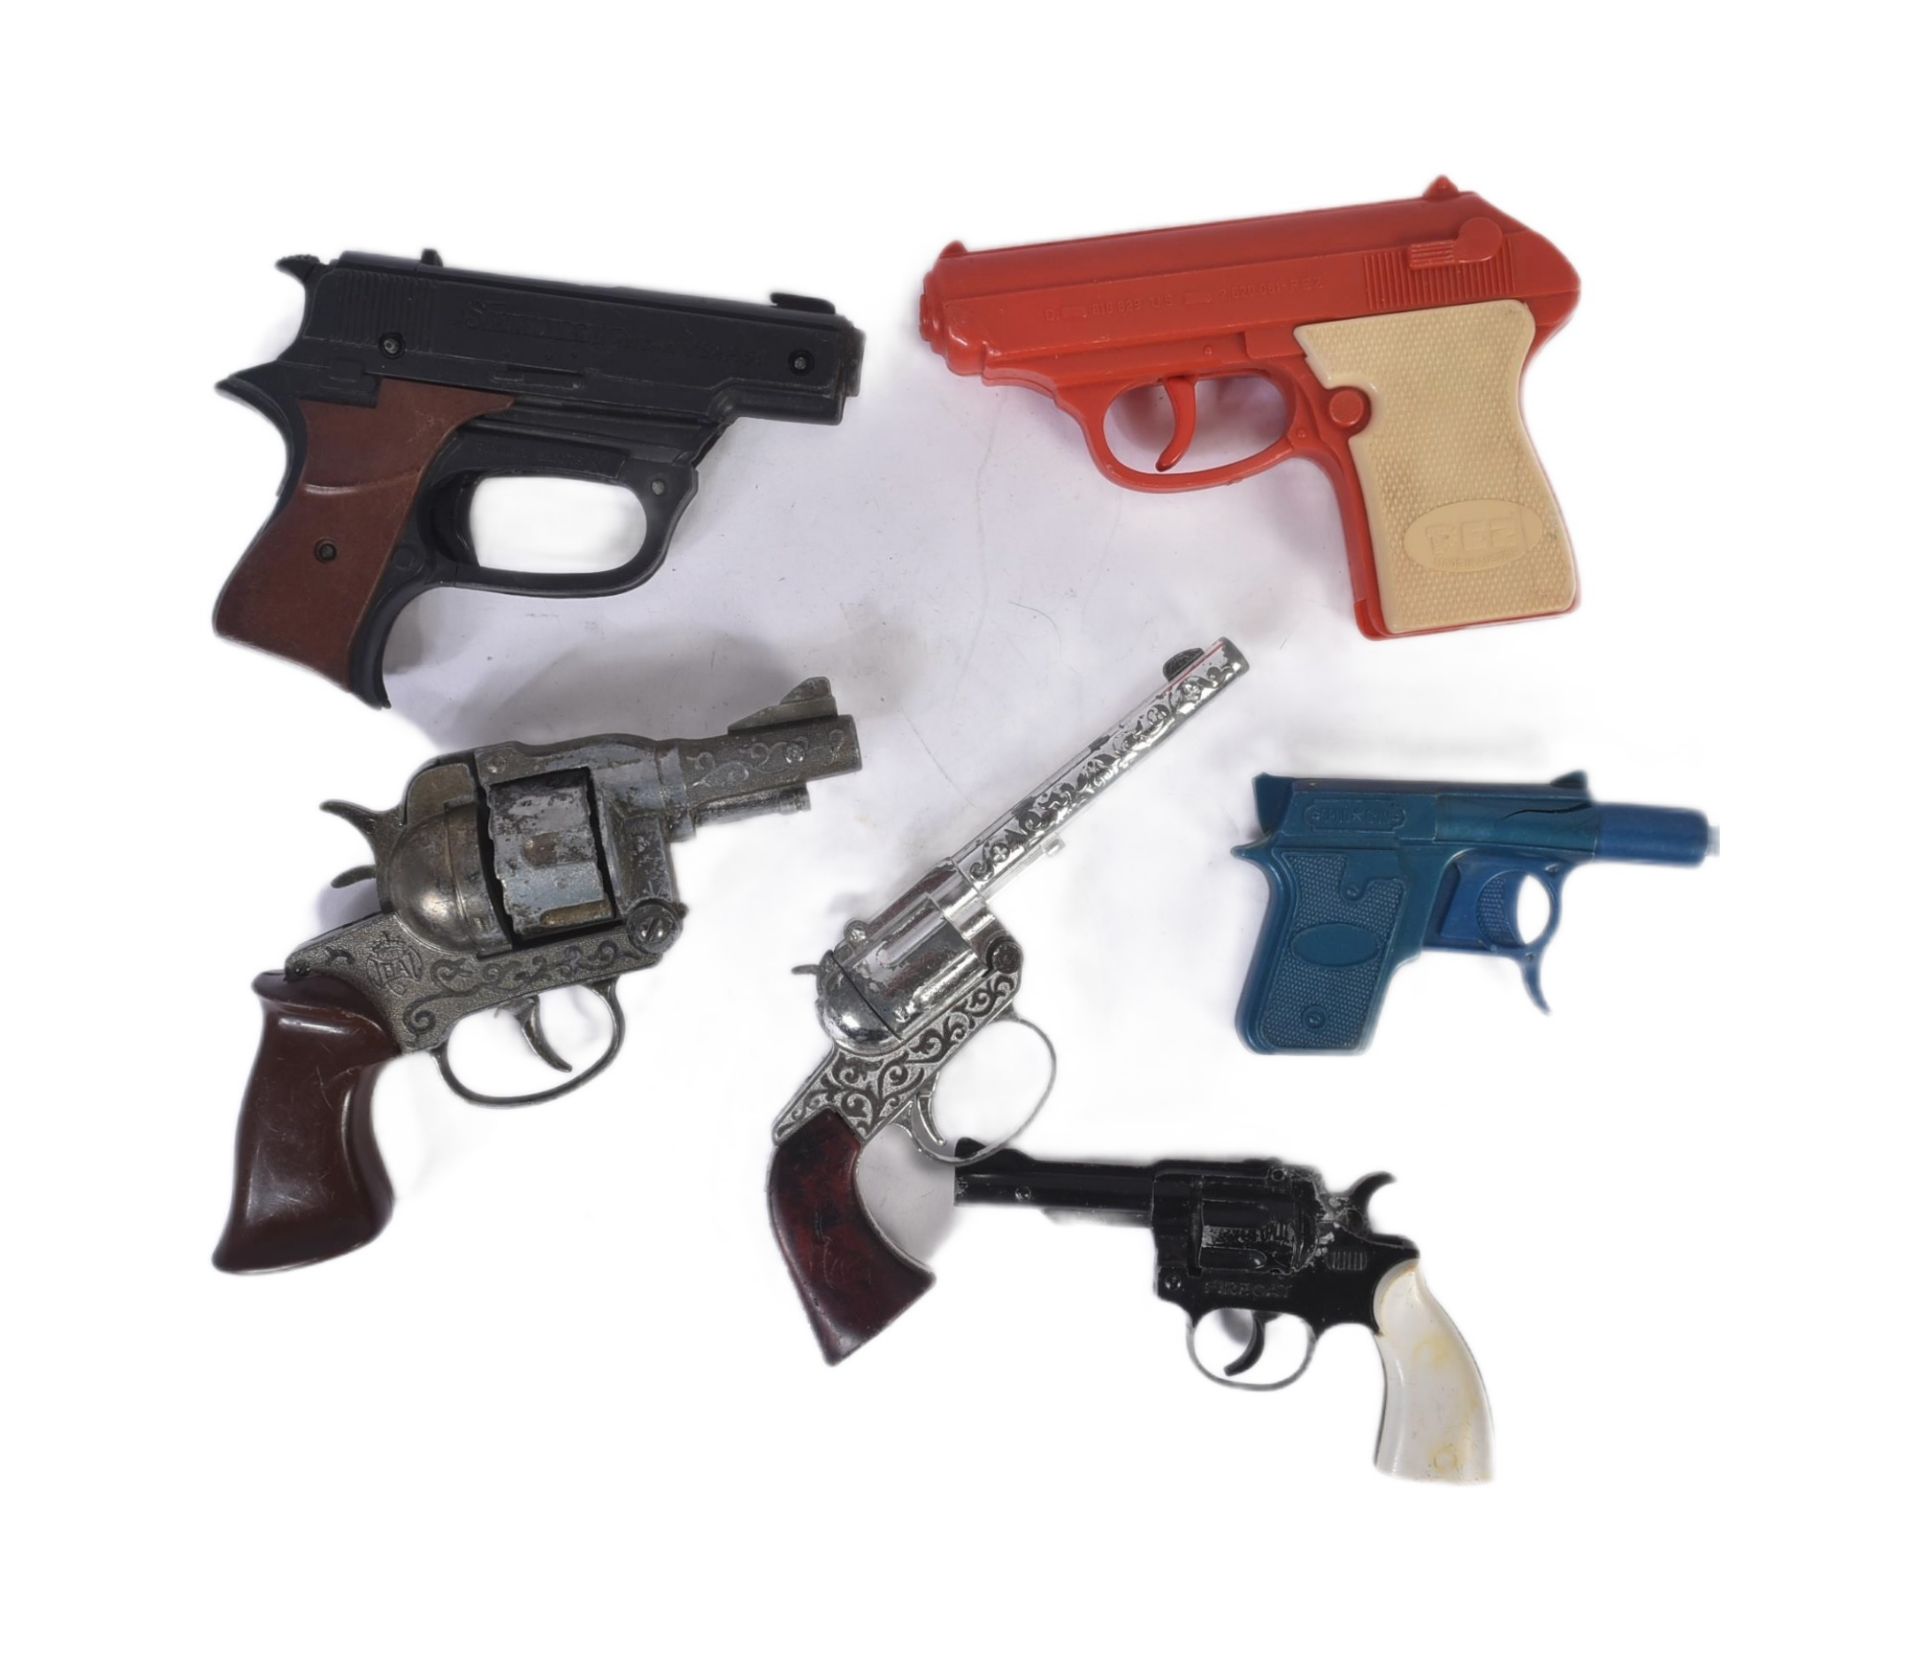 COLLECTION OF VINTAGE TOY PISTOL / GUNS